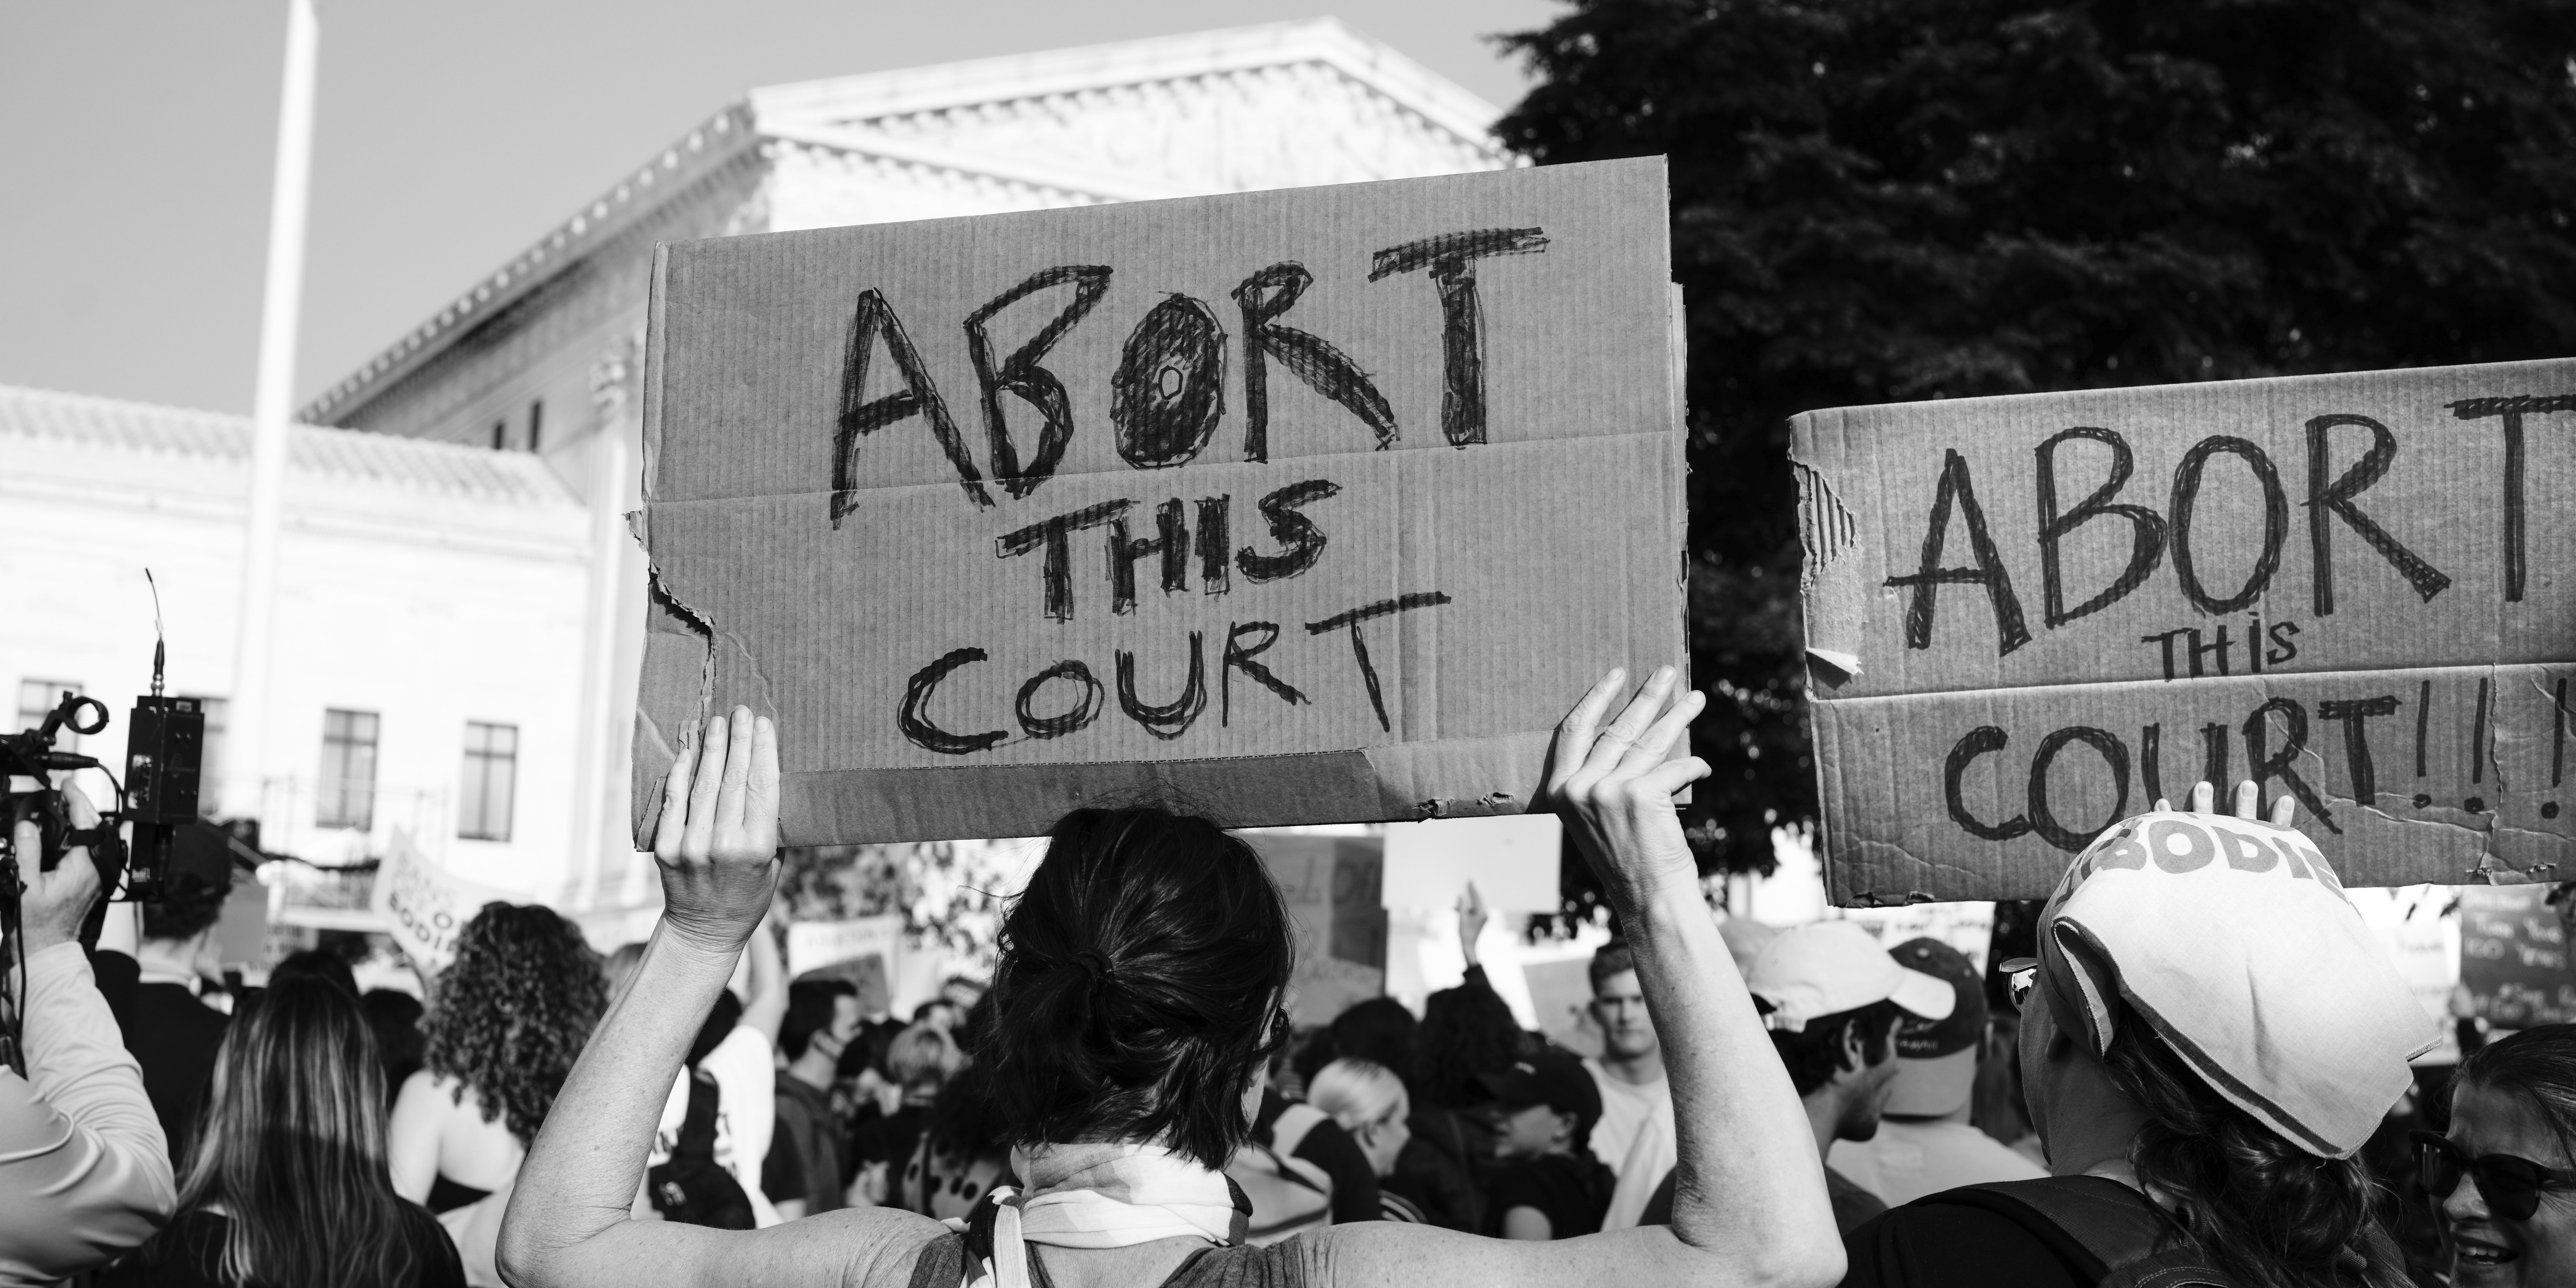 Protestor holding up sign 'abort this court' in front of the Sur